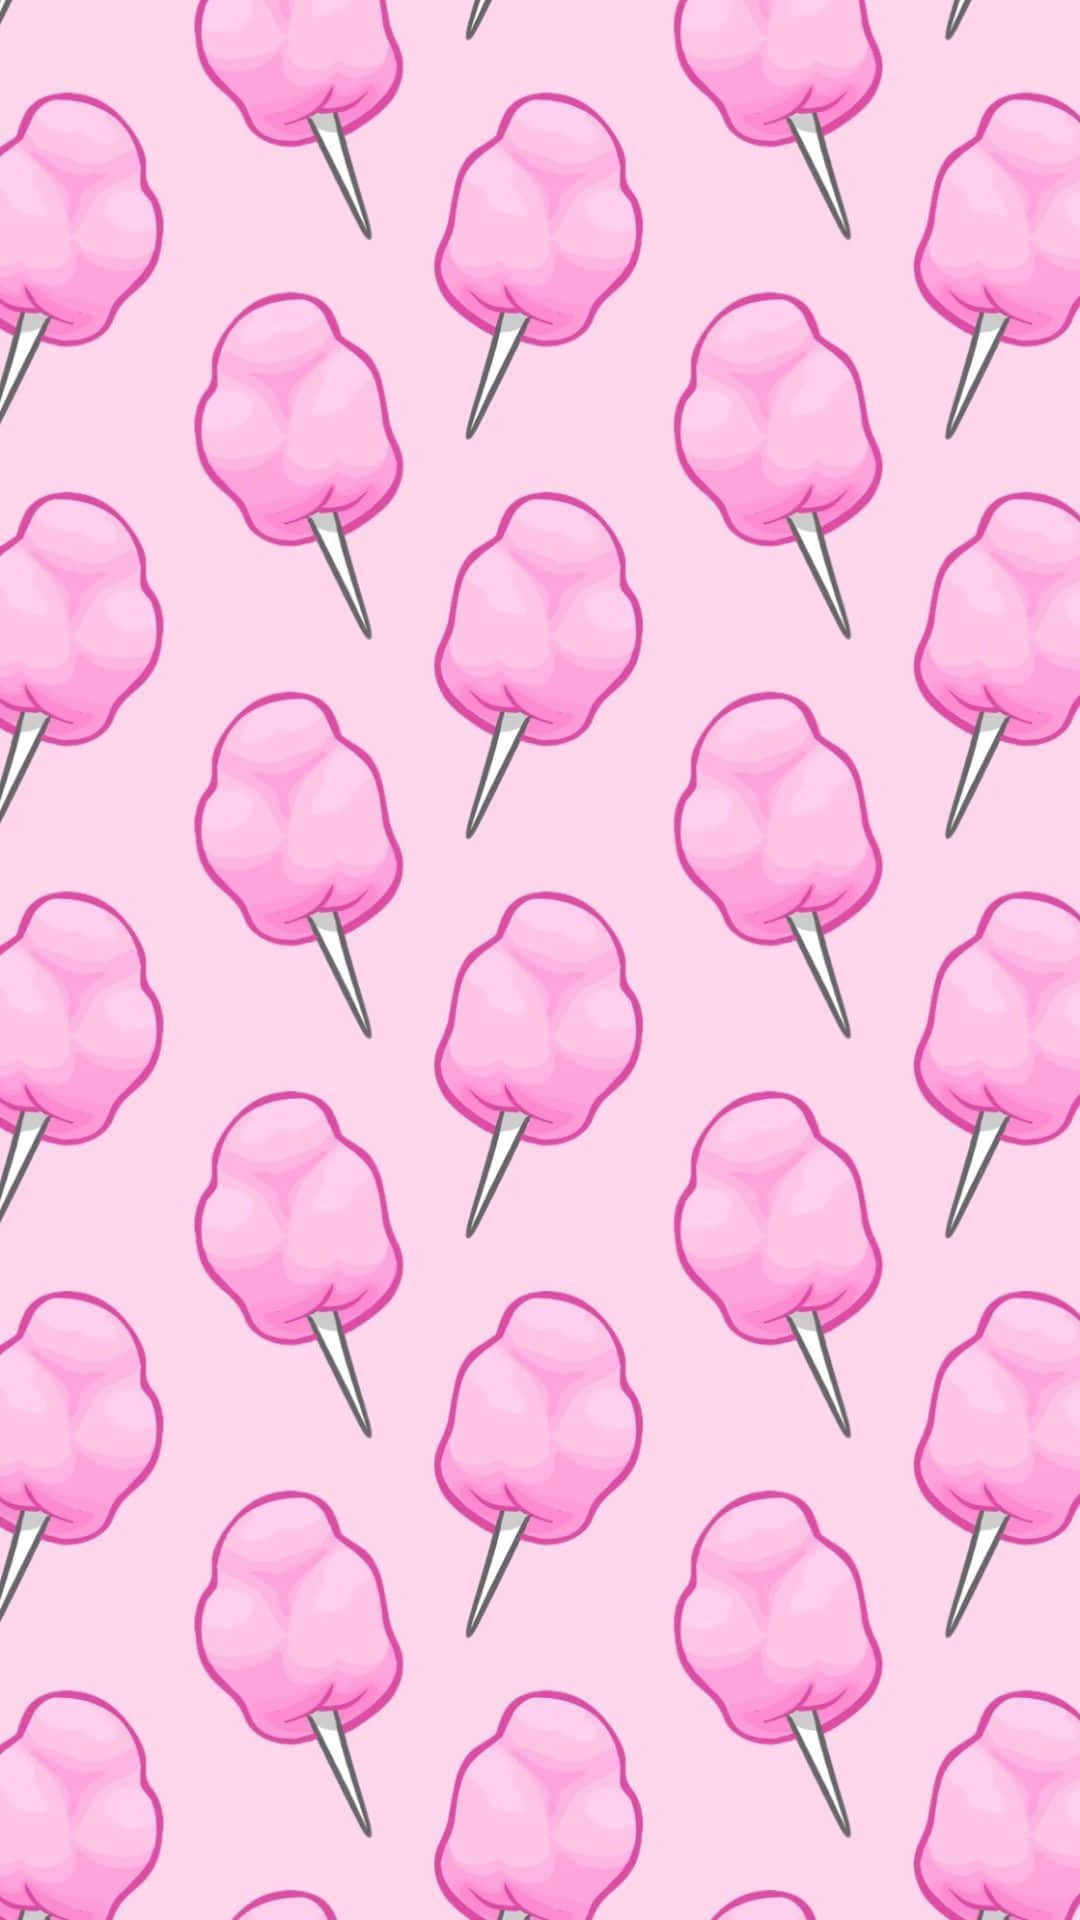 Kawaii Cotton Candy wallpaper by SinfulxKittie  Download on ZEDGE  77ee